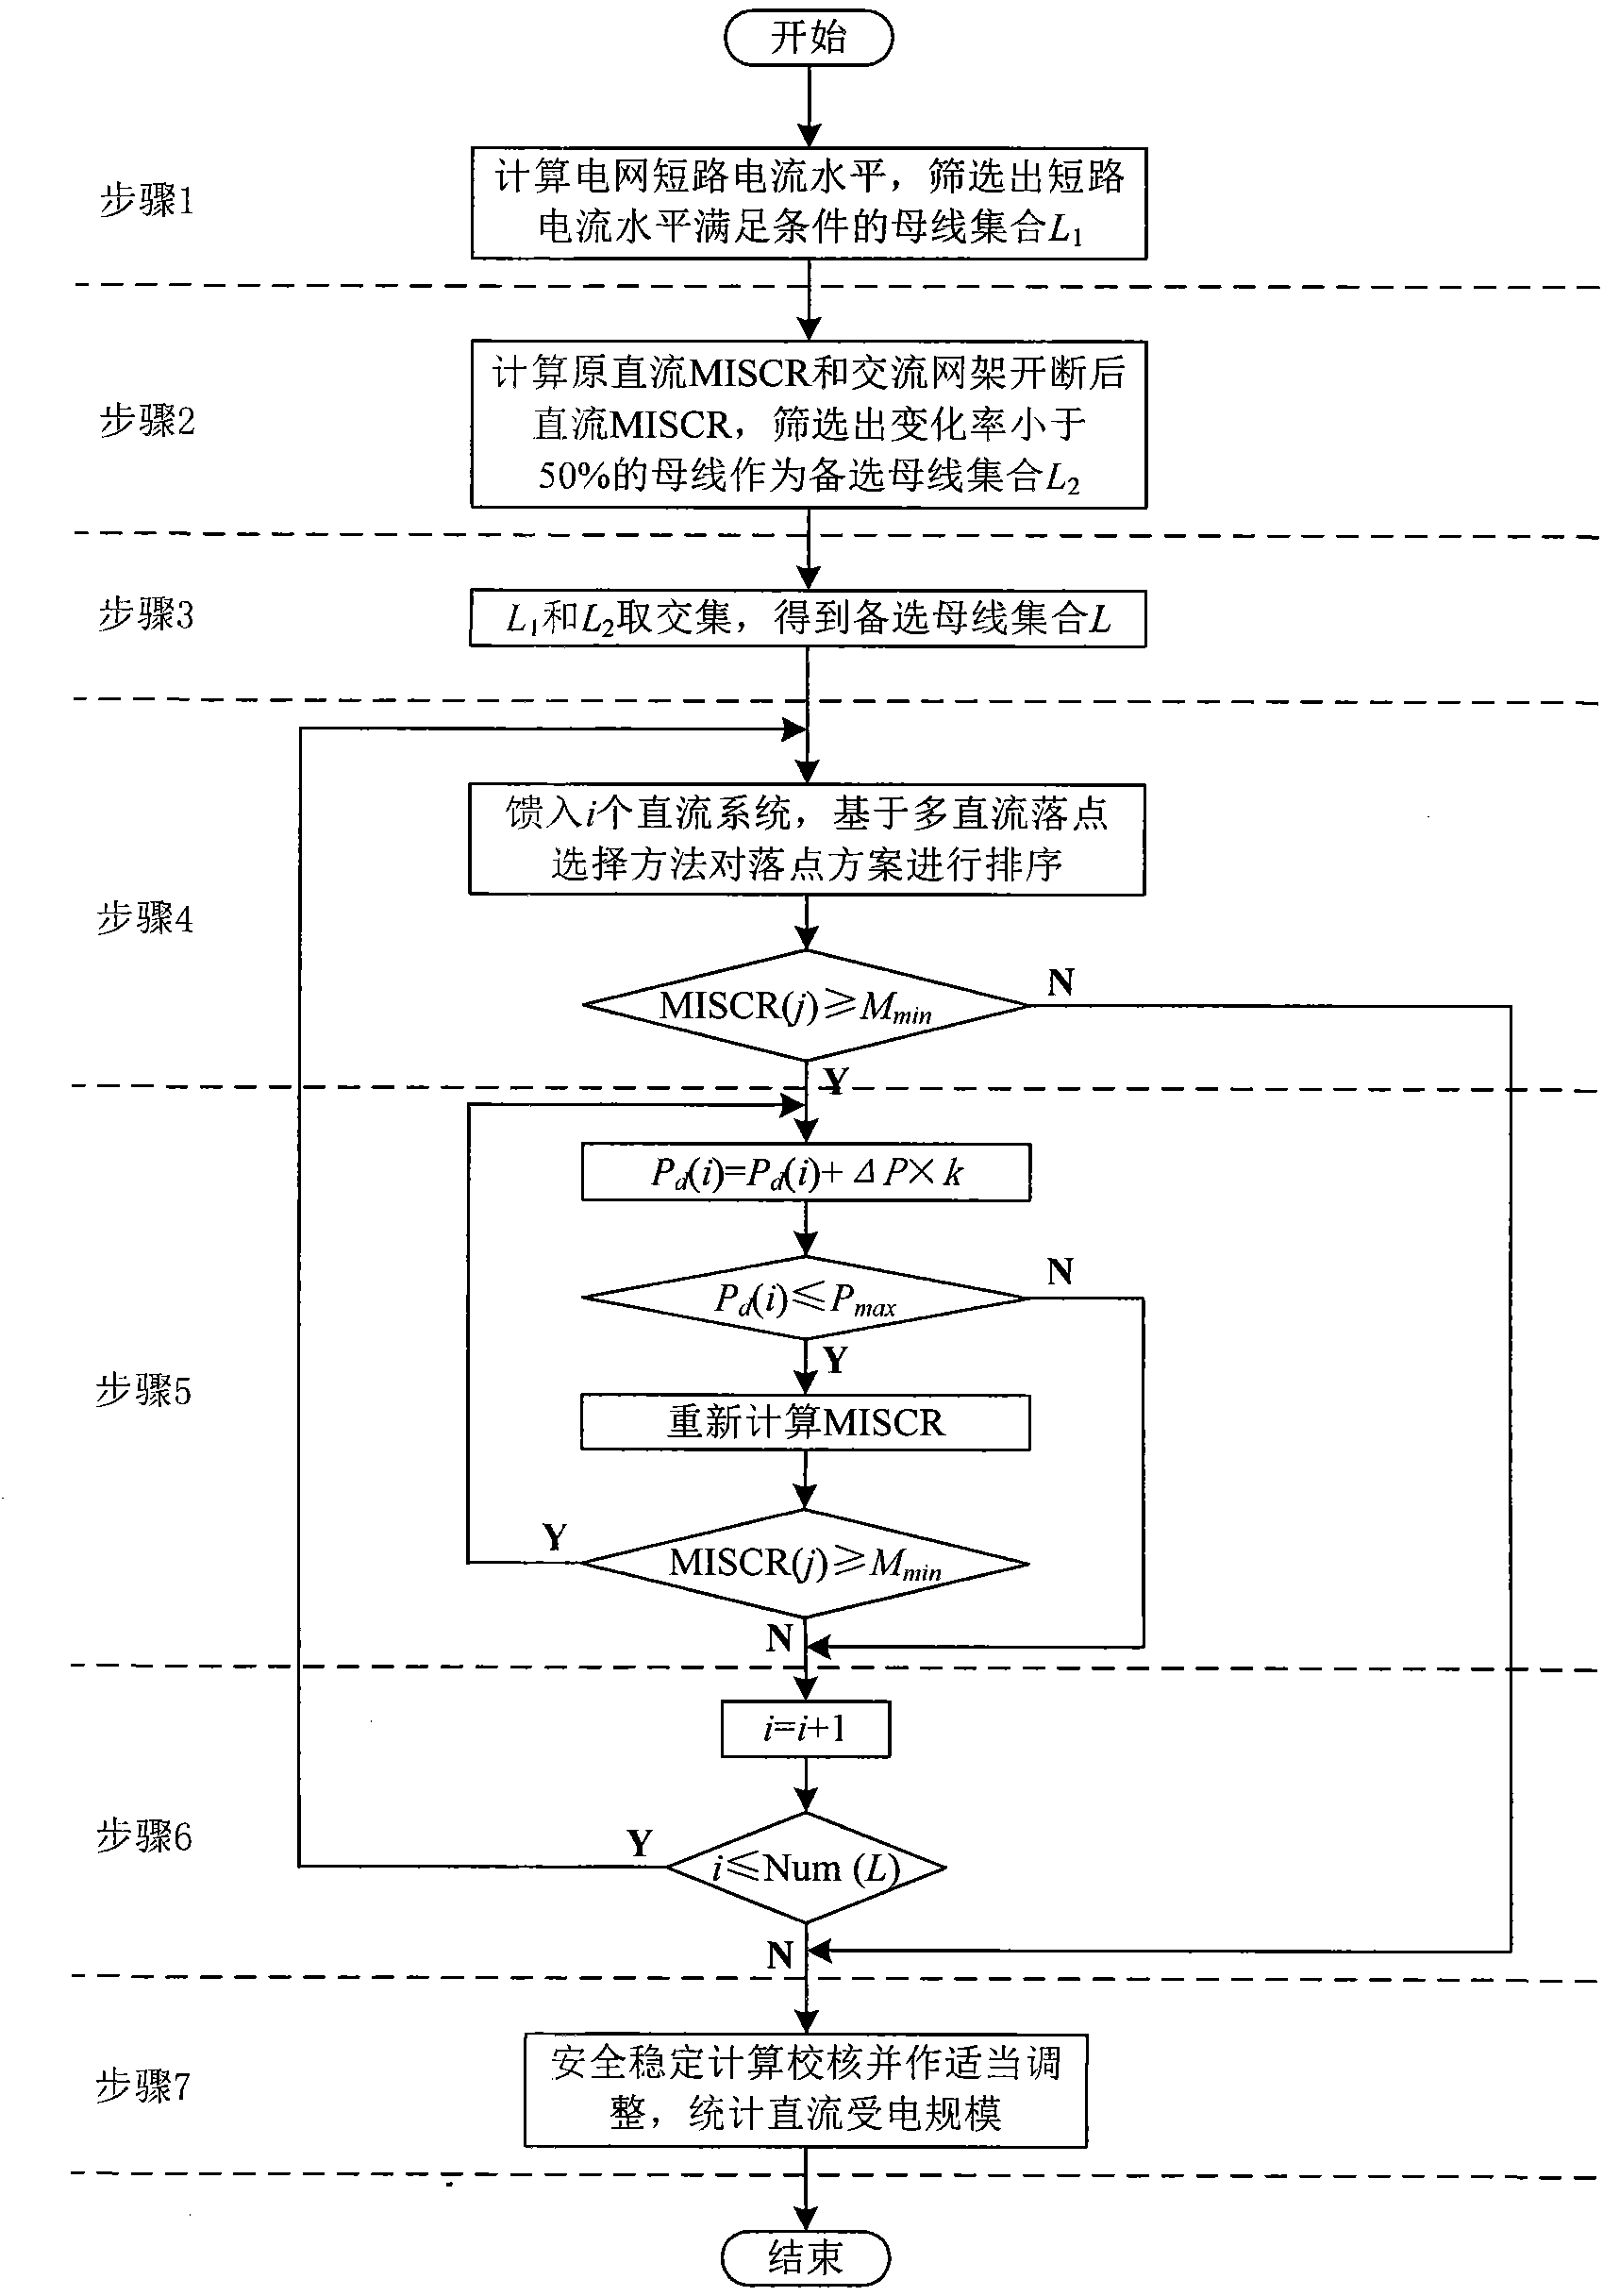 Alternating-current receiving end grid direct-current receiving scale calculation method